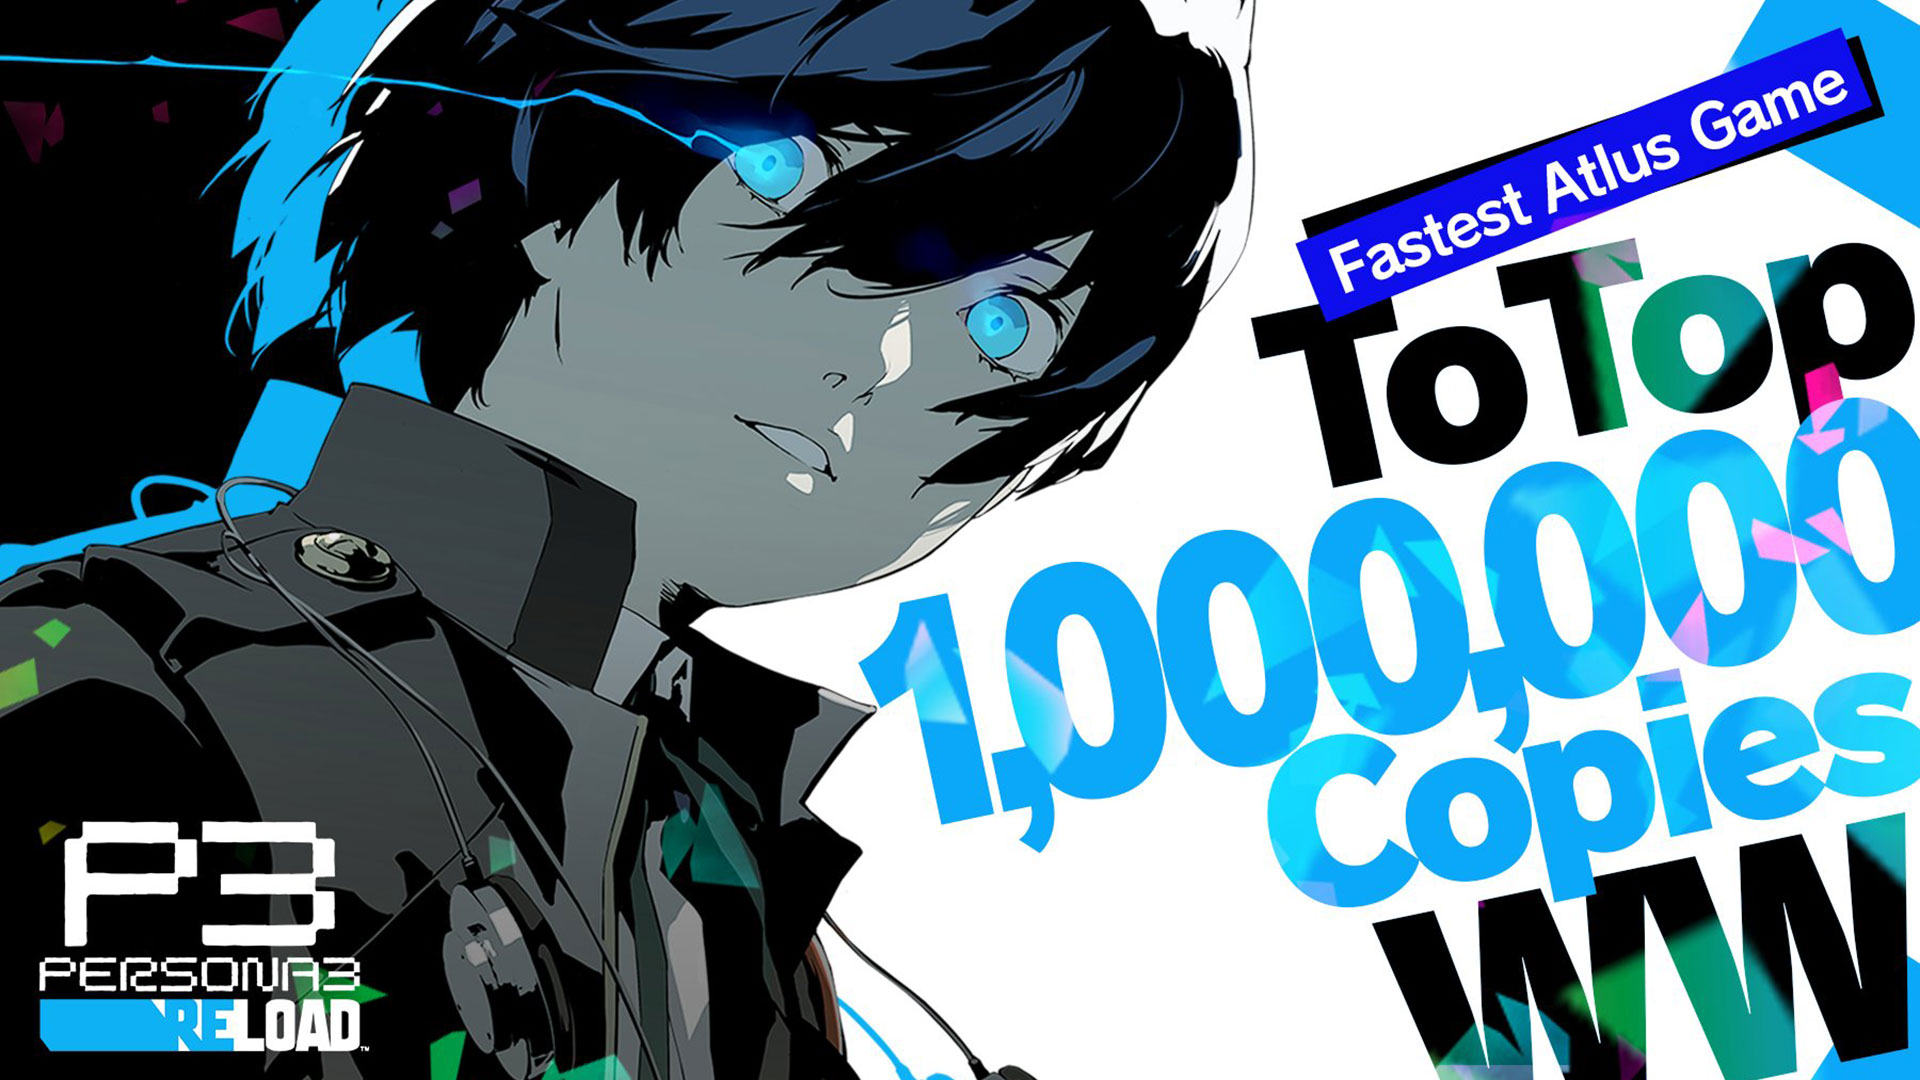 Persona 3 Reload has sold over one million copies within its first week